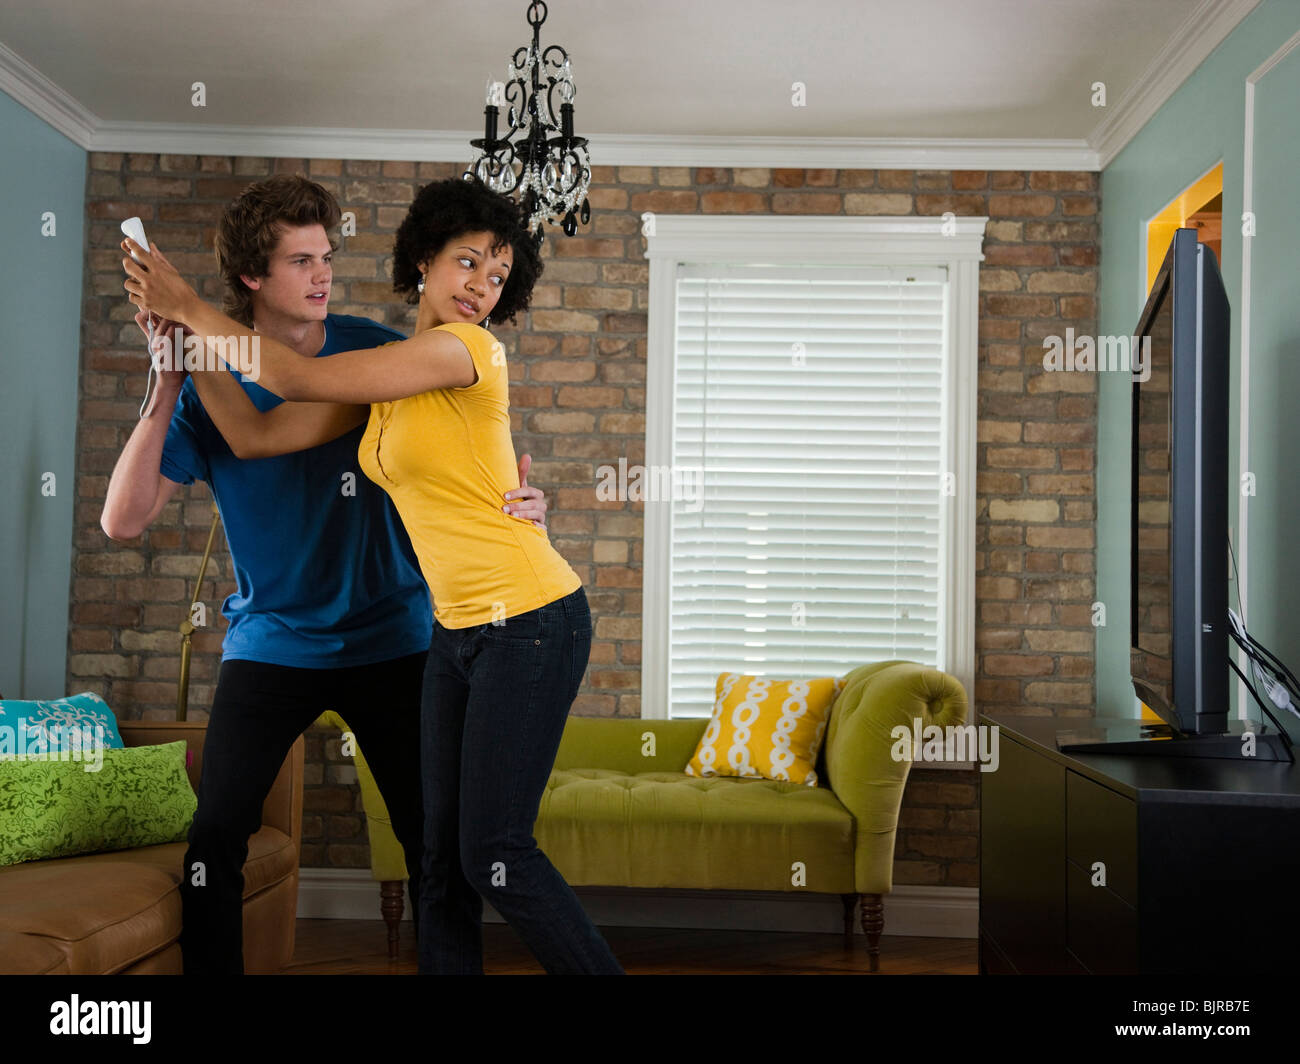 USA, Utah, Provo, young couple holding remote control in living room Stock Photo